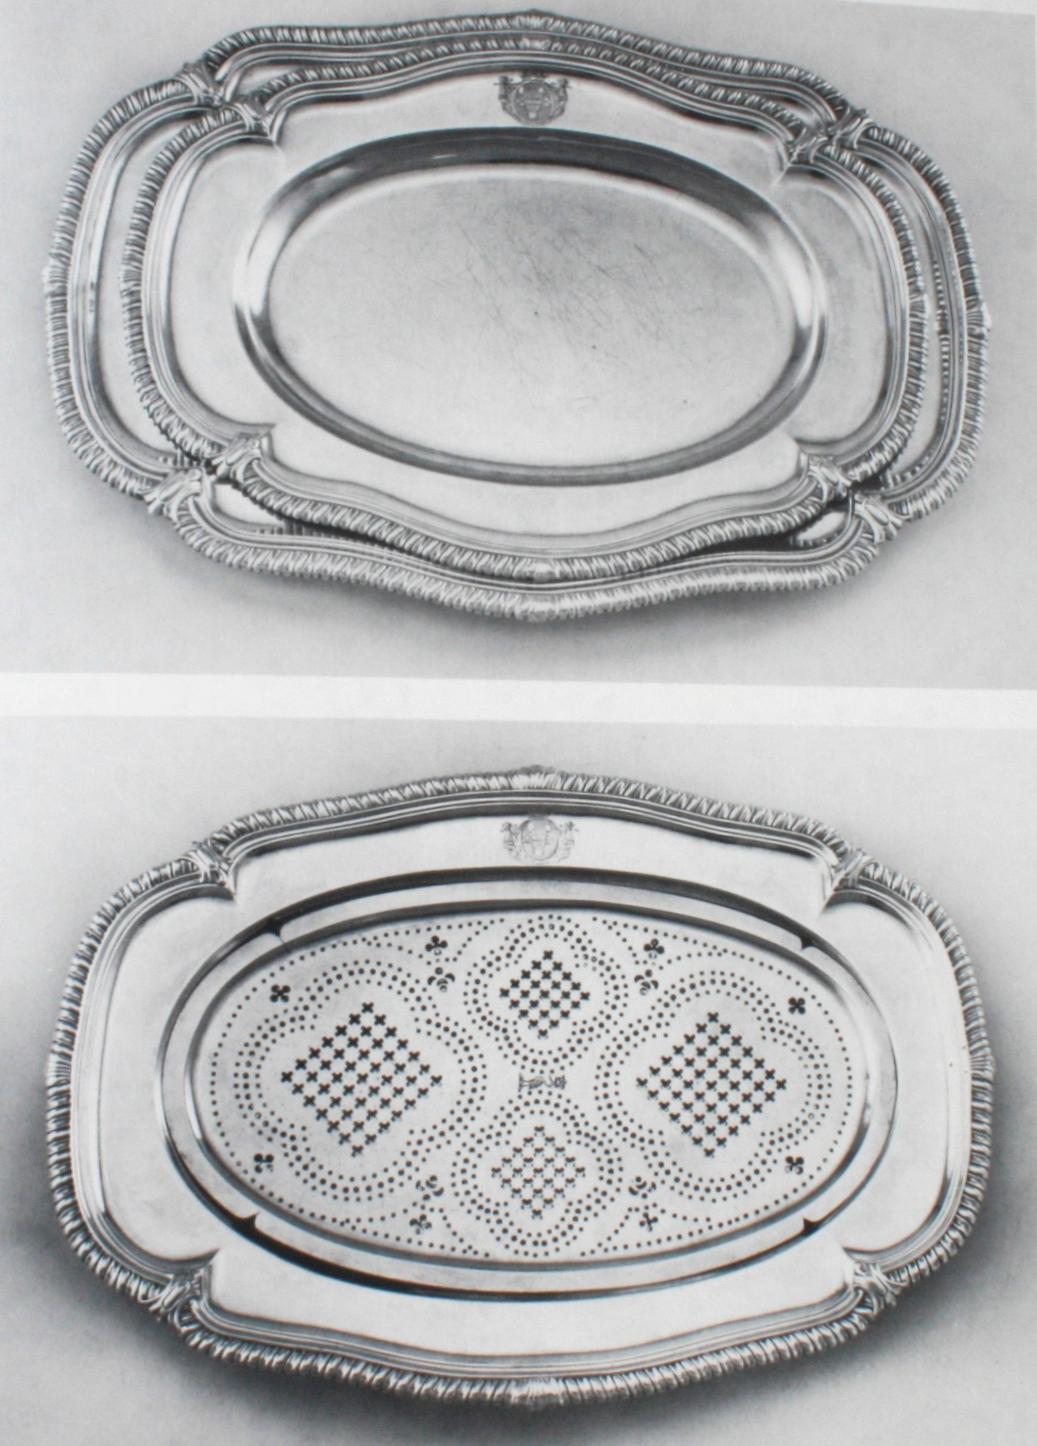 Paper Silverware by Alain Gruber, First Edition Book